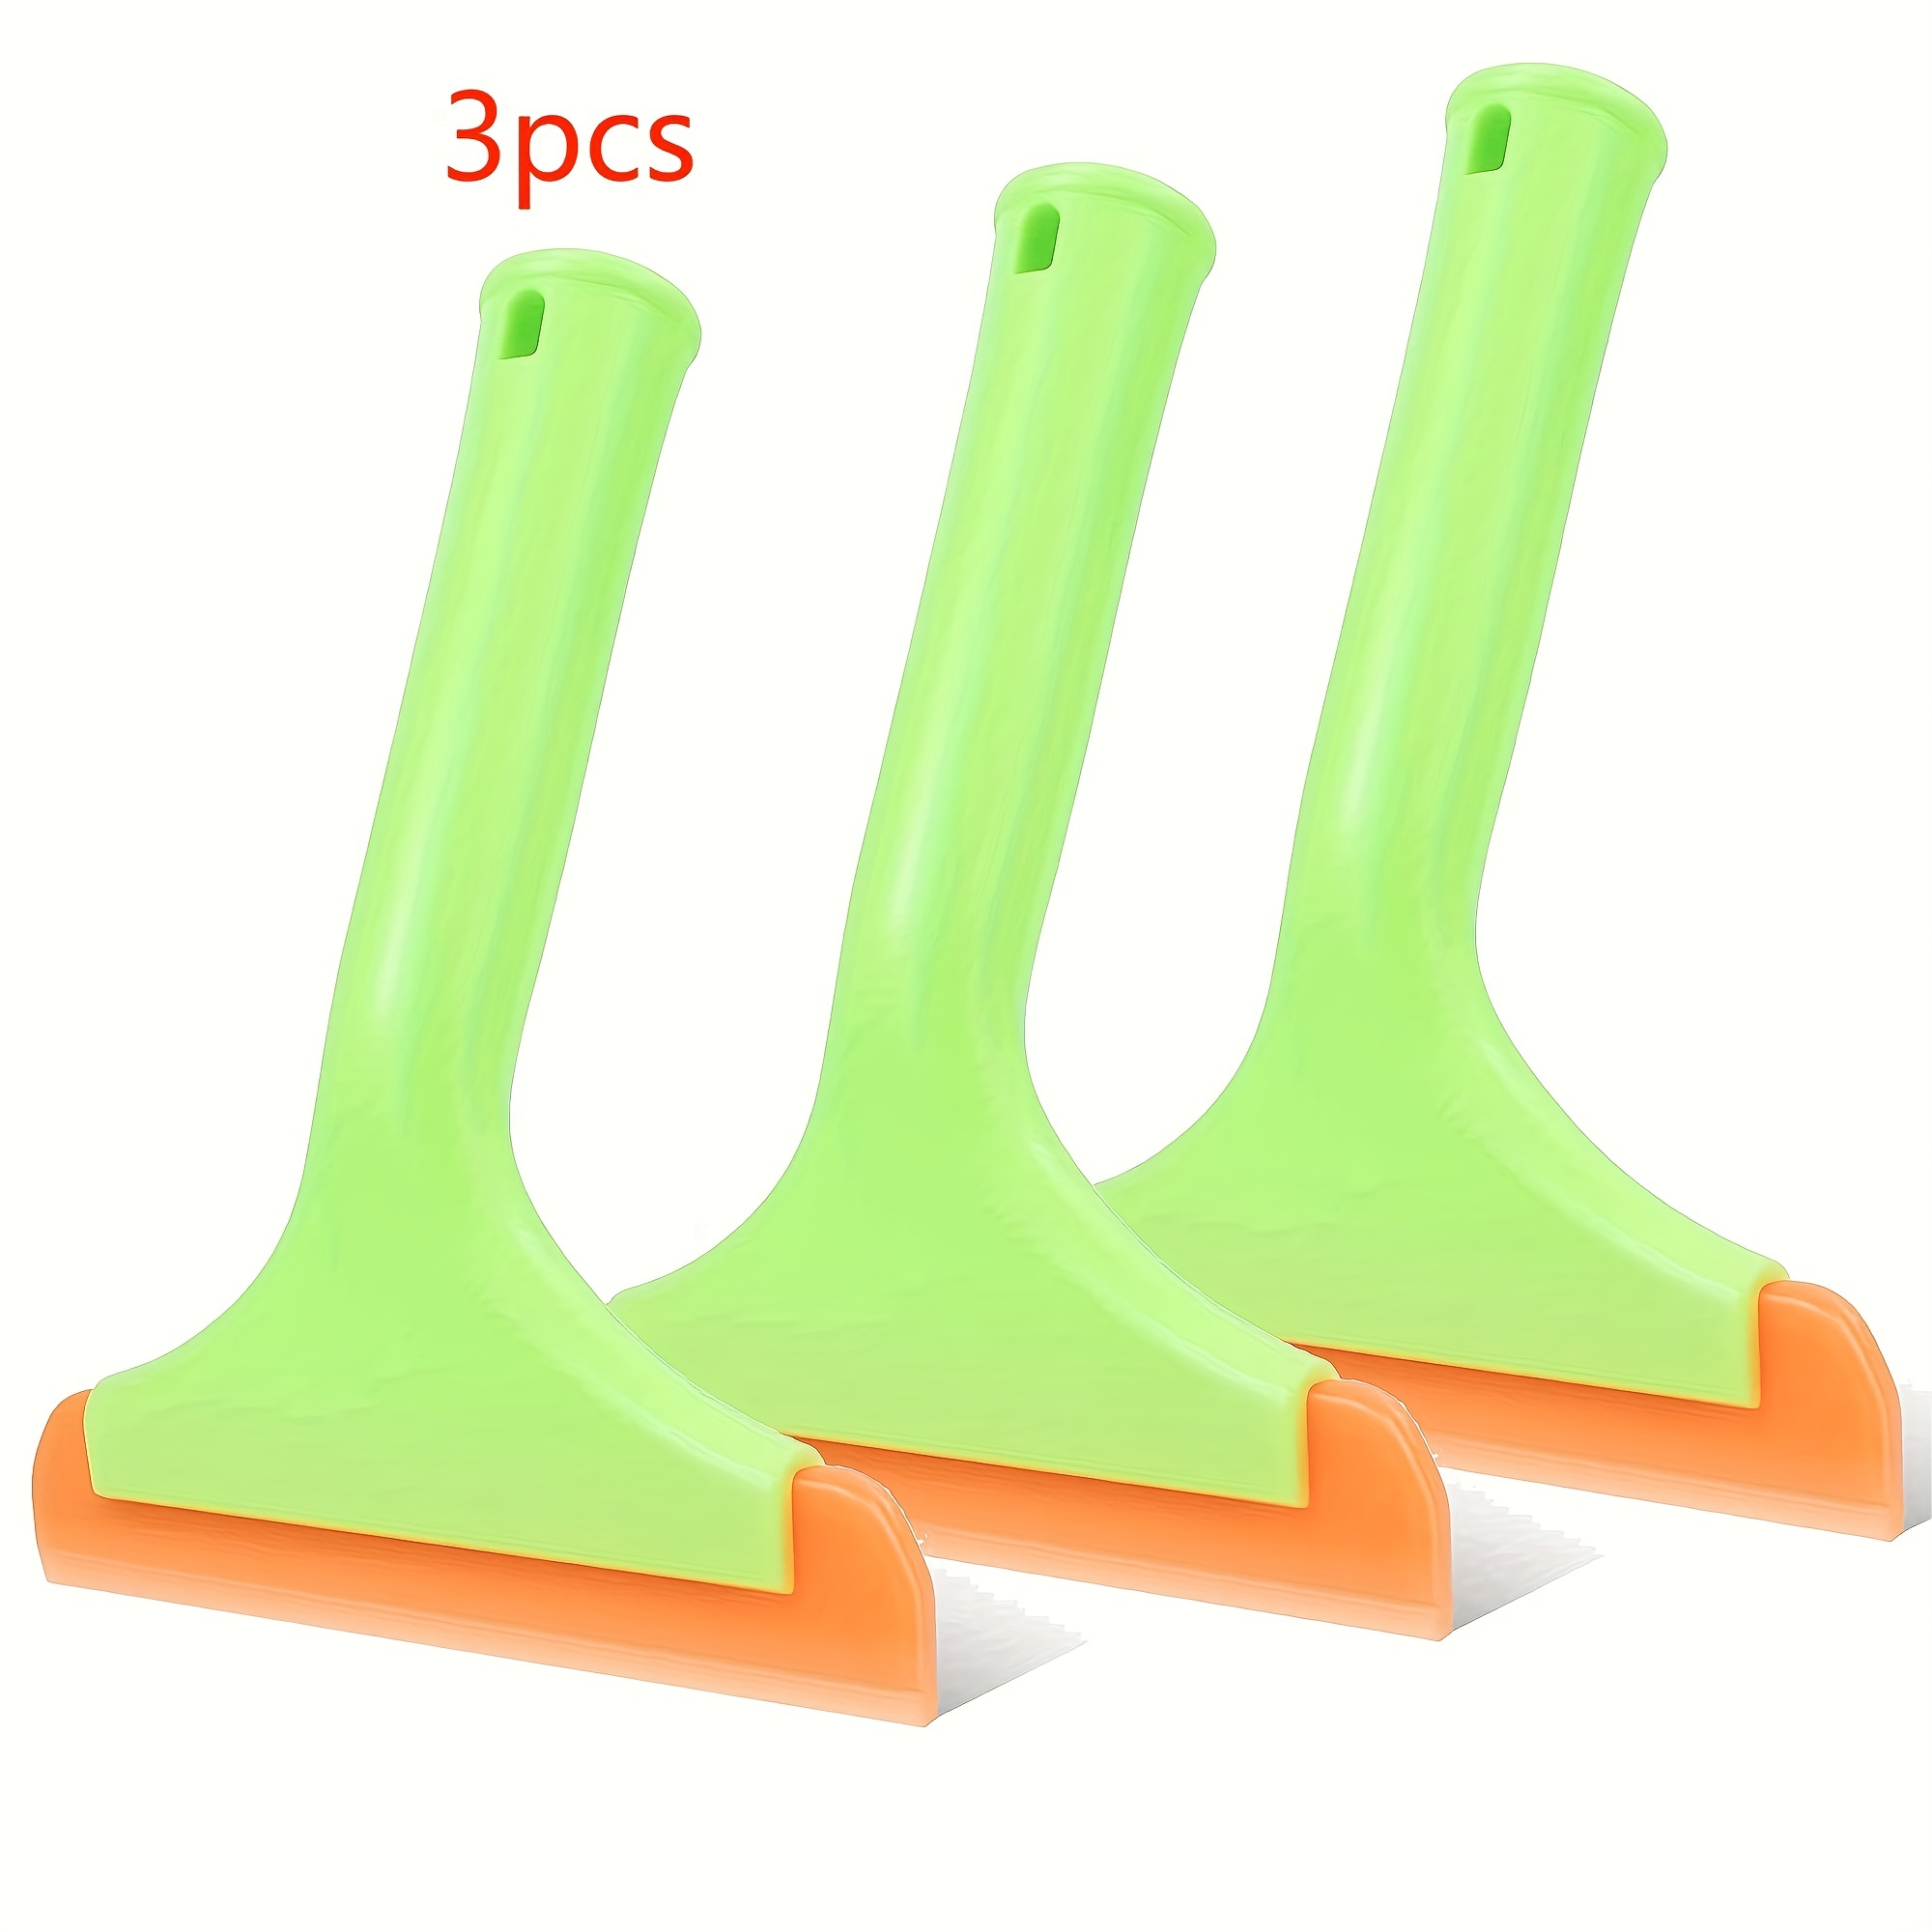 Silicone Water Blade 12 inch - Super Flexible Silicone Squeegee